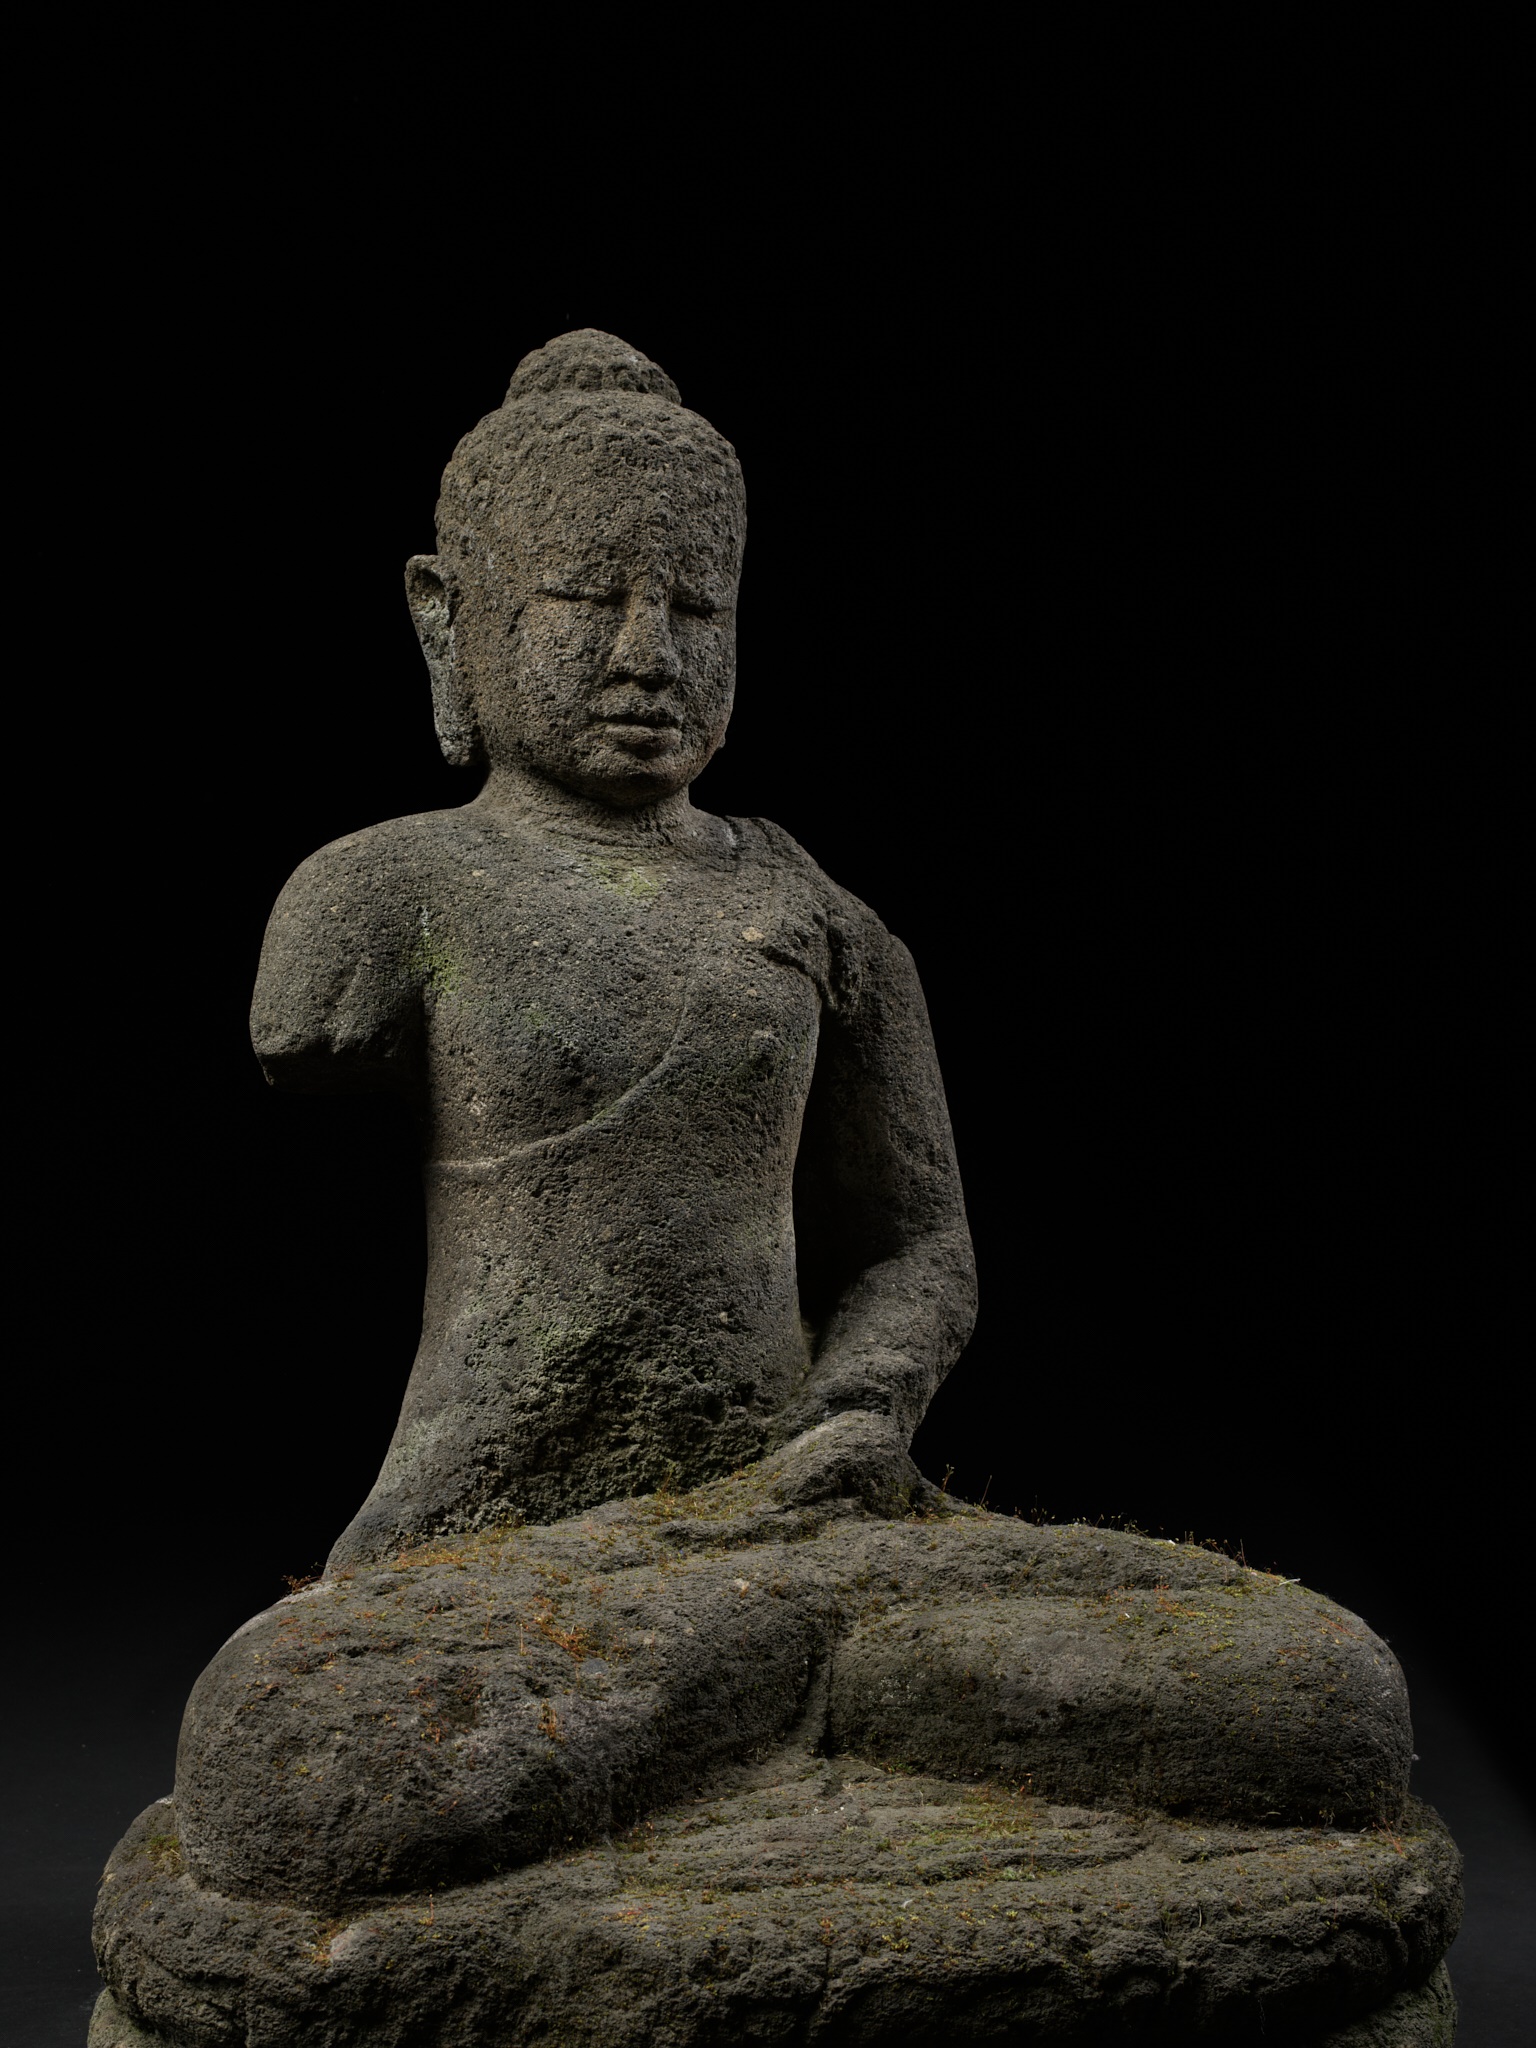 A VOLCANIC STONE FIGURE OF BUDDHA, CENTRAL JAVA, INDONESIA, FIRST HALF OF THE 9TH CENTURY - Image 3 of 14